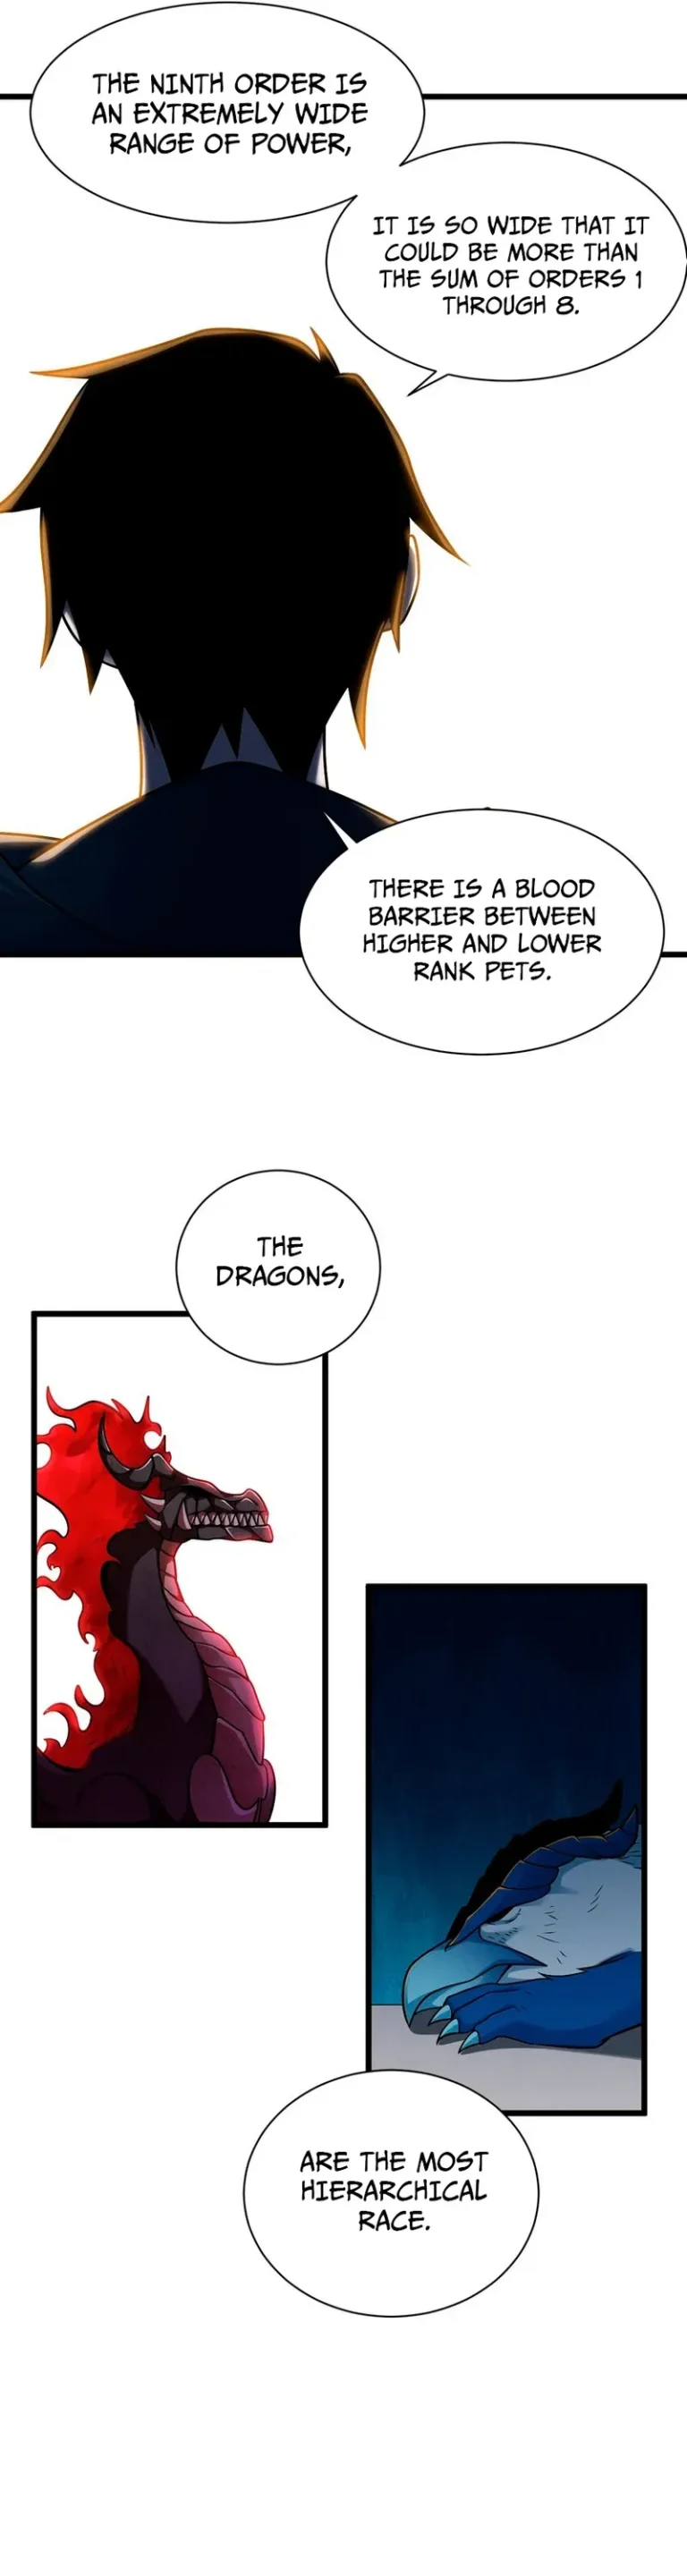 THE DRAGONS,